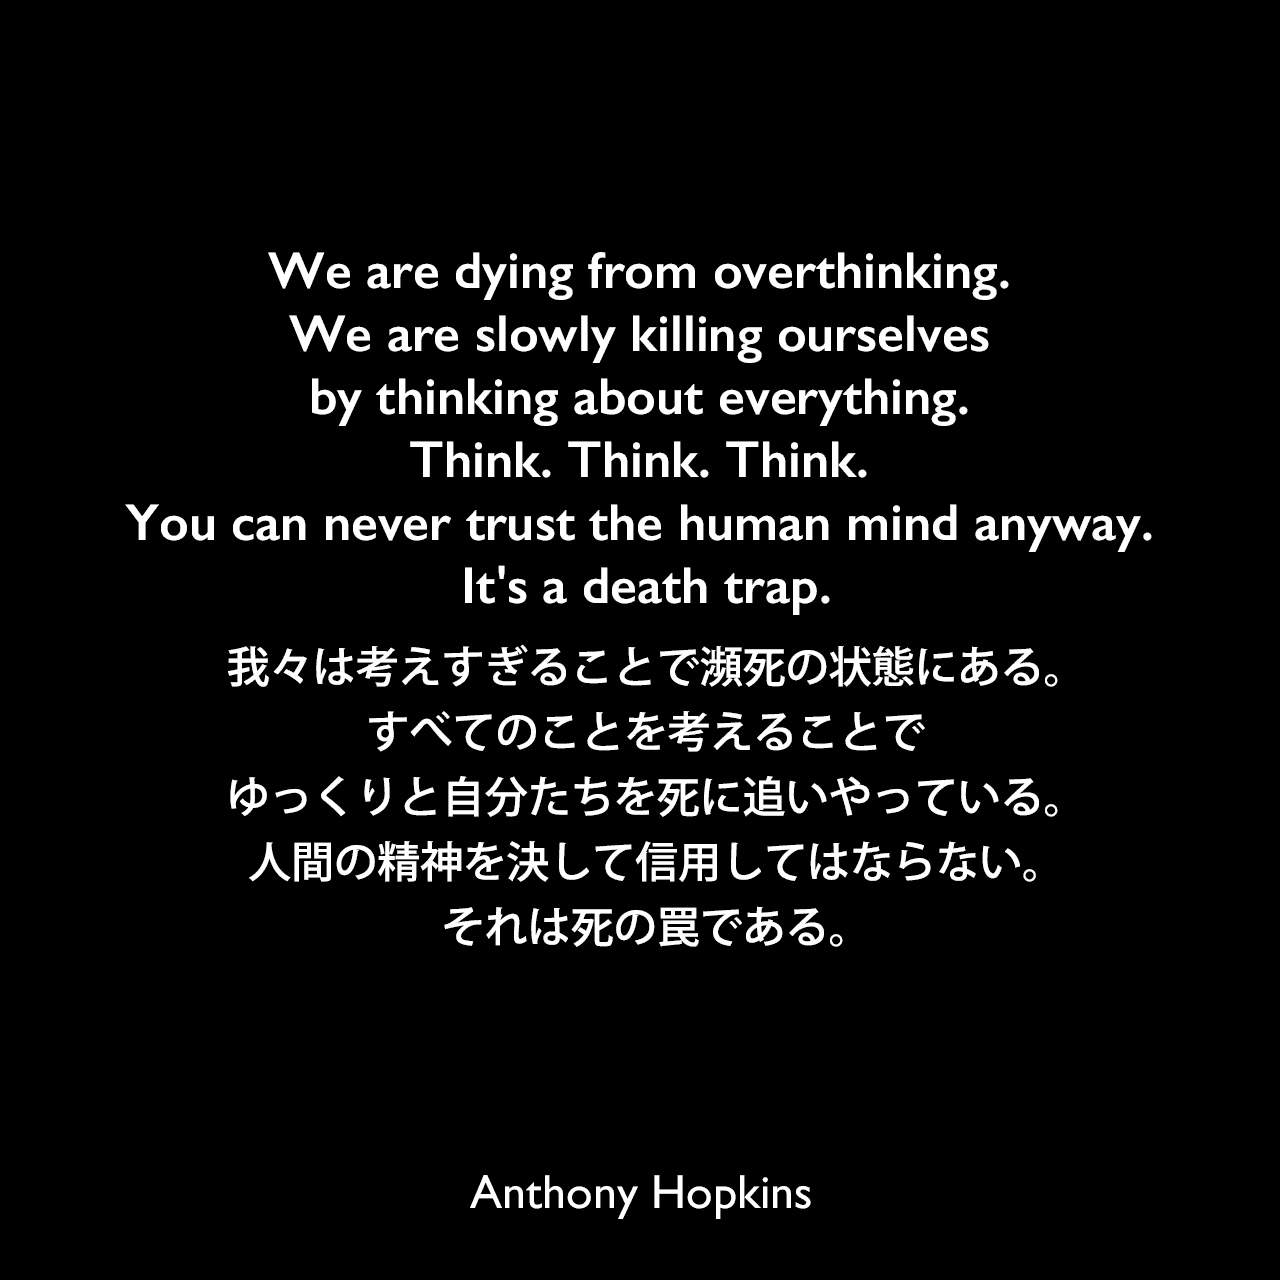 We are dying from overthinking. We are slowly killing ourselves by thinking about everything. Think. Think. Think. You can never trust the human mind anyway. It's a death trap.我々は考えすぎることで瀕死の状態にある。すべてのことを考えることでゆっくりと自分たちを死に追いやっている。人間の精神を決して信用してはならない。それは死の罠である。Anthony Hopkins